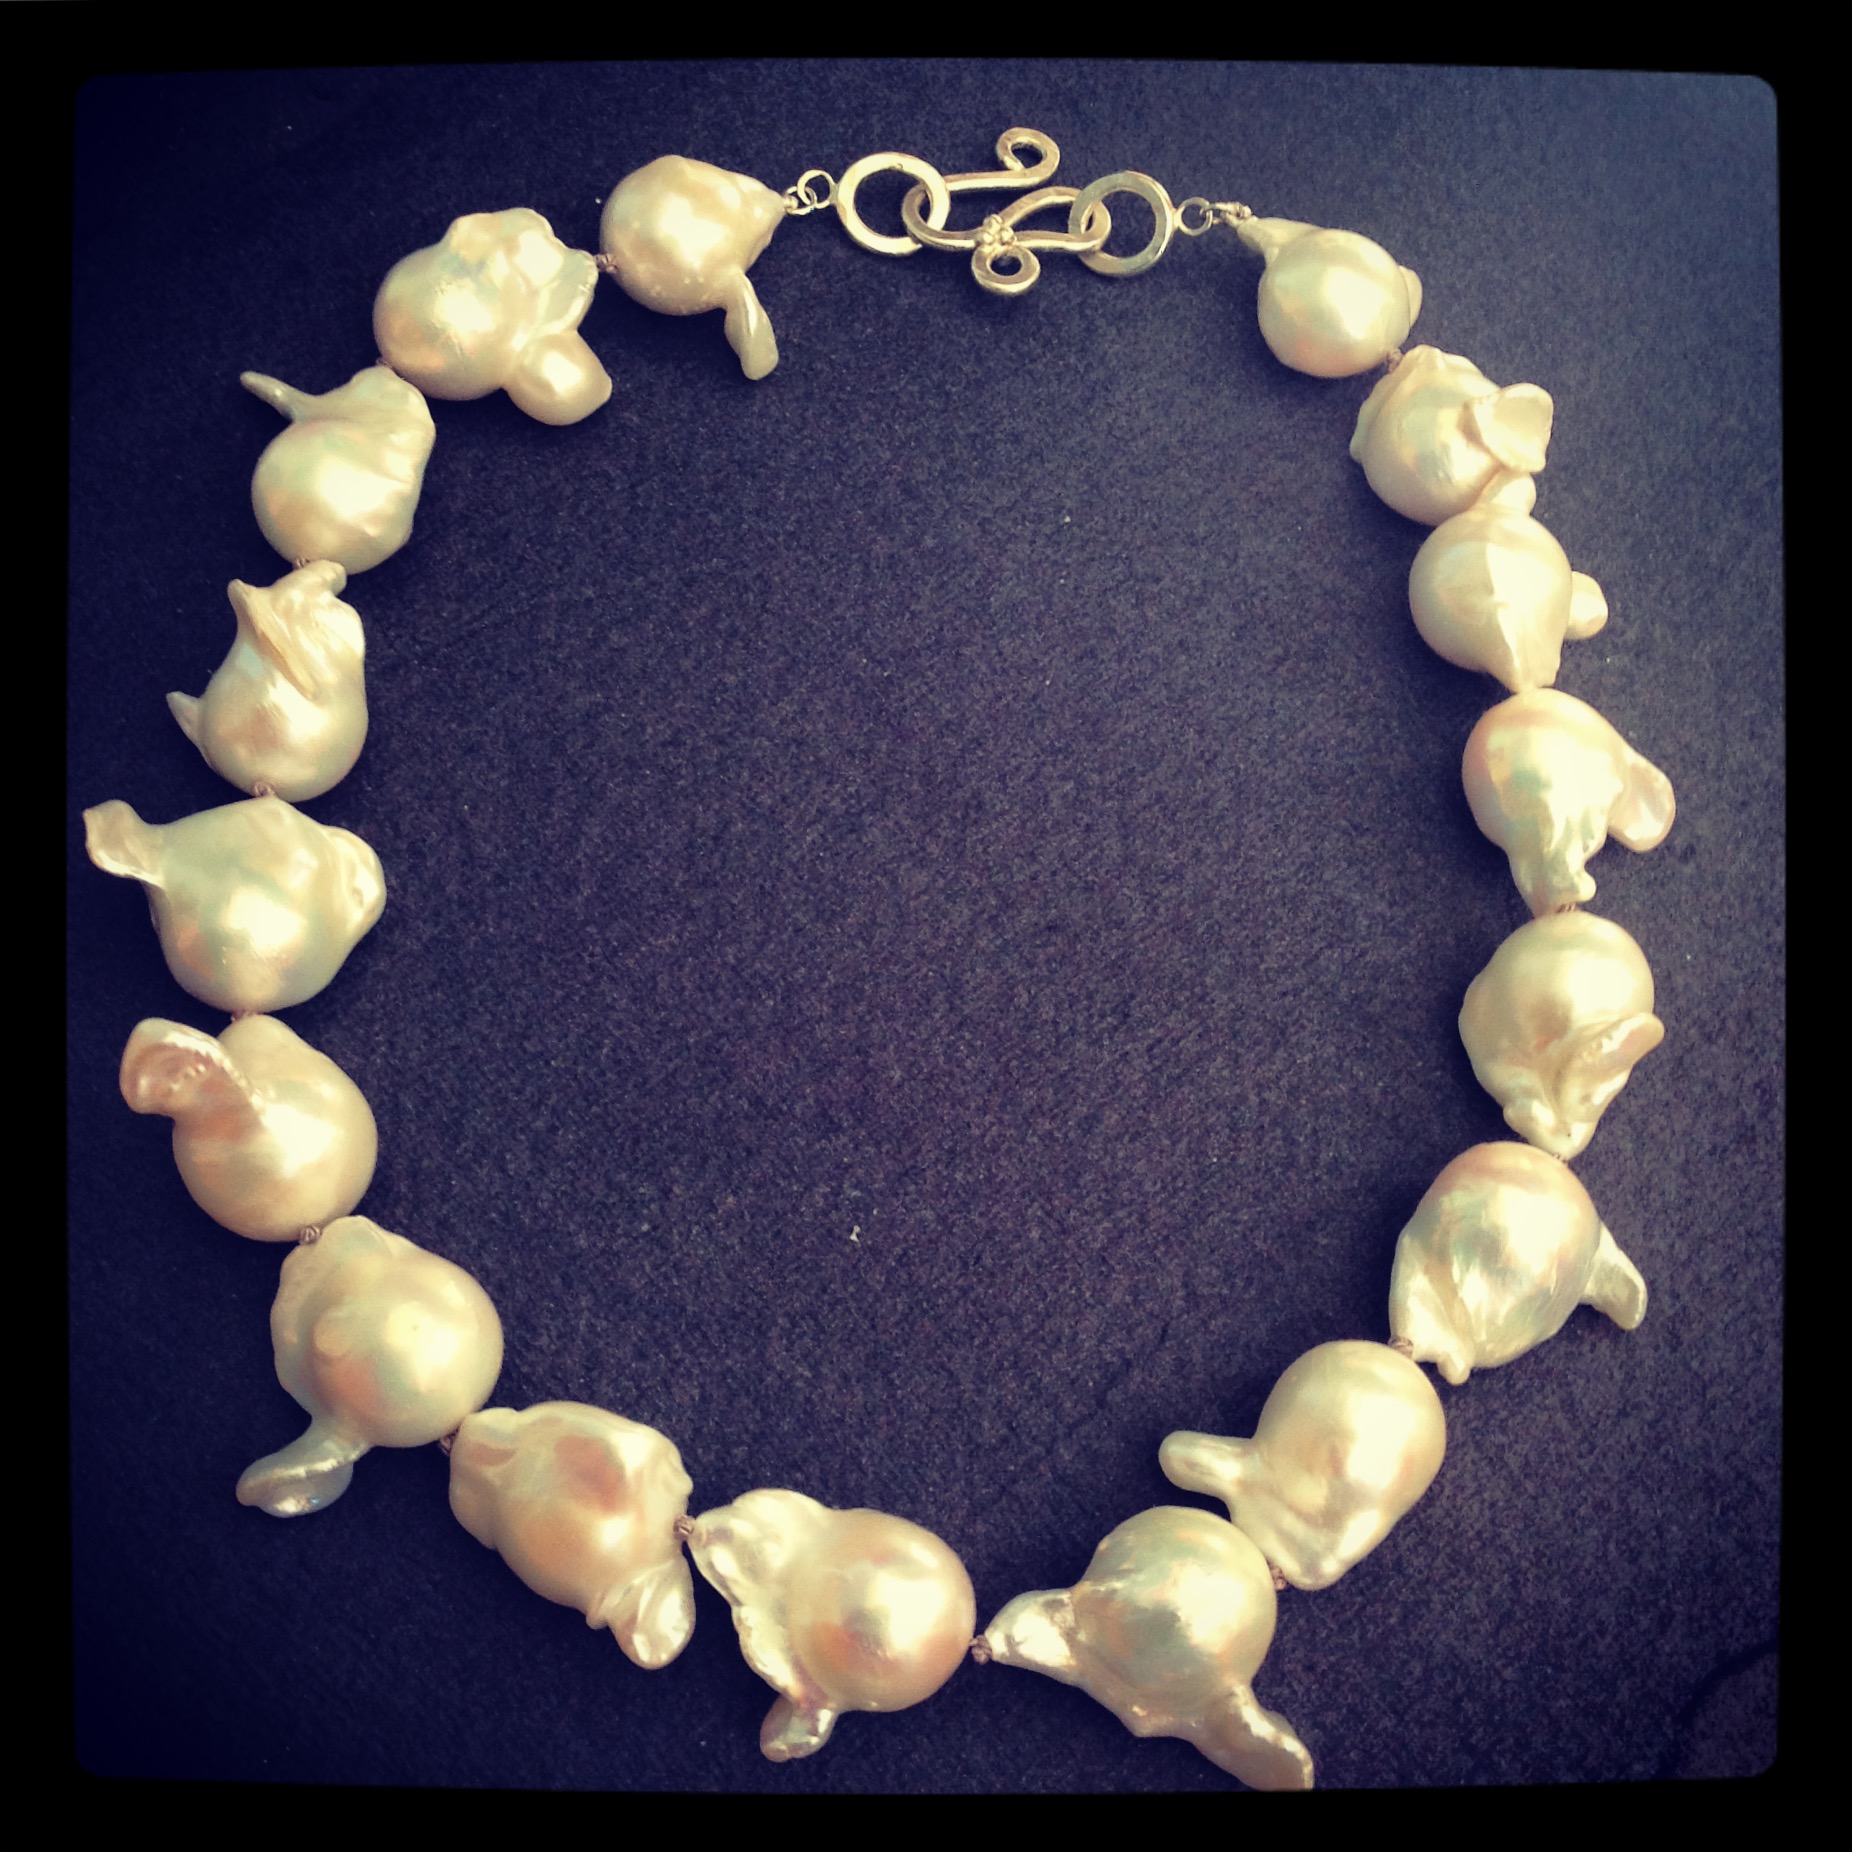 Baroque pearls with a white gold clasp